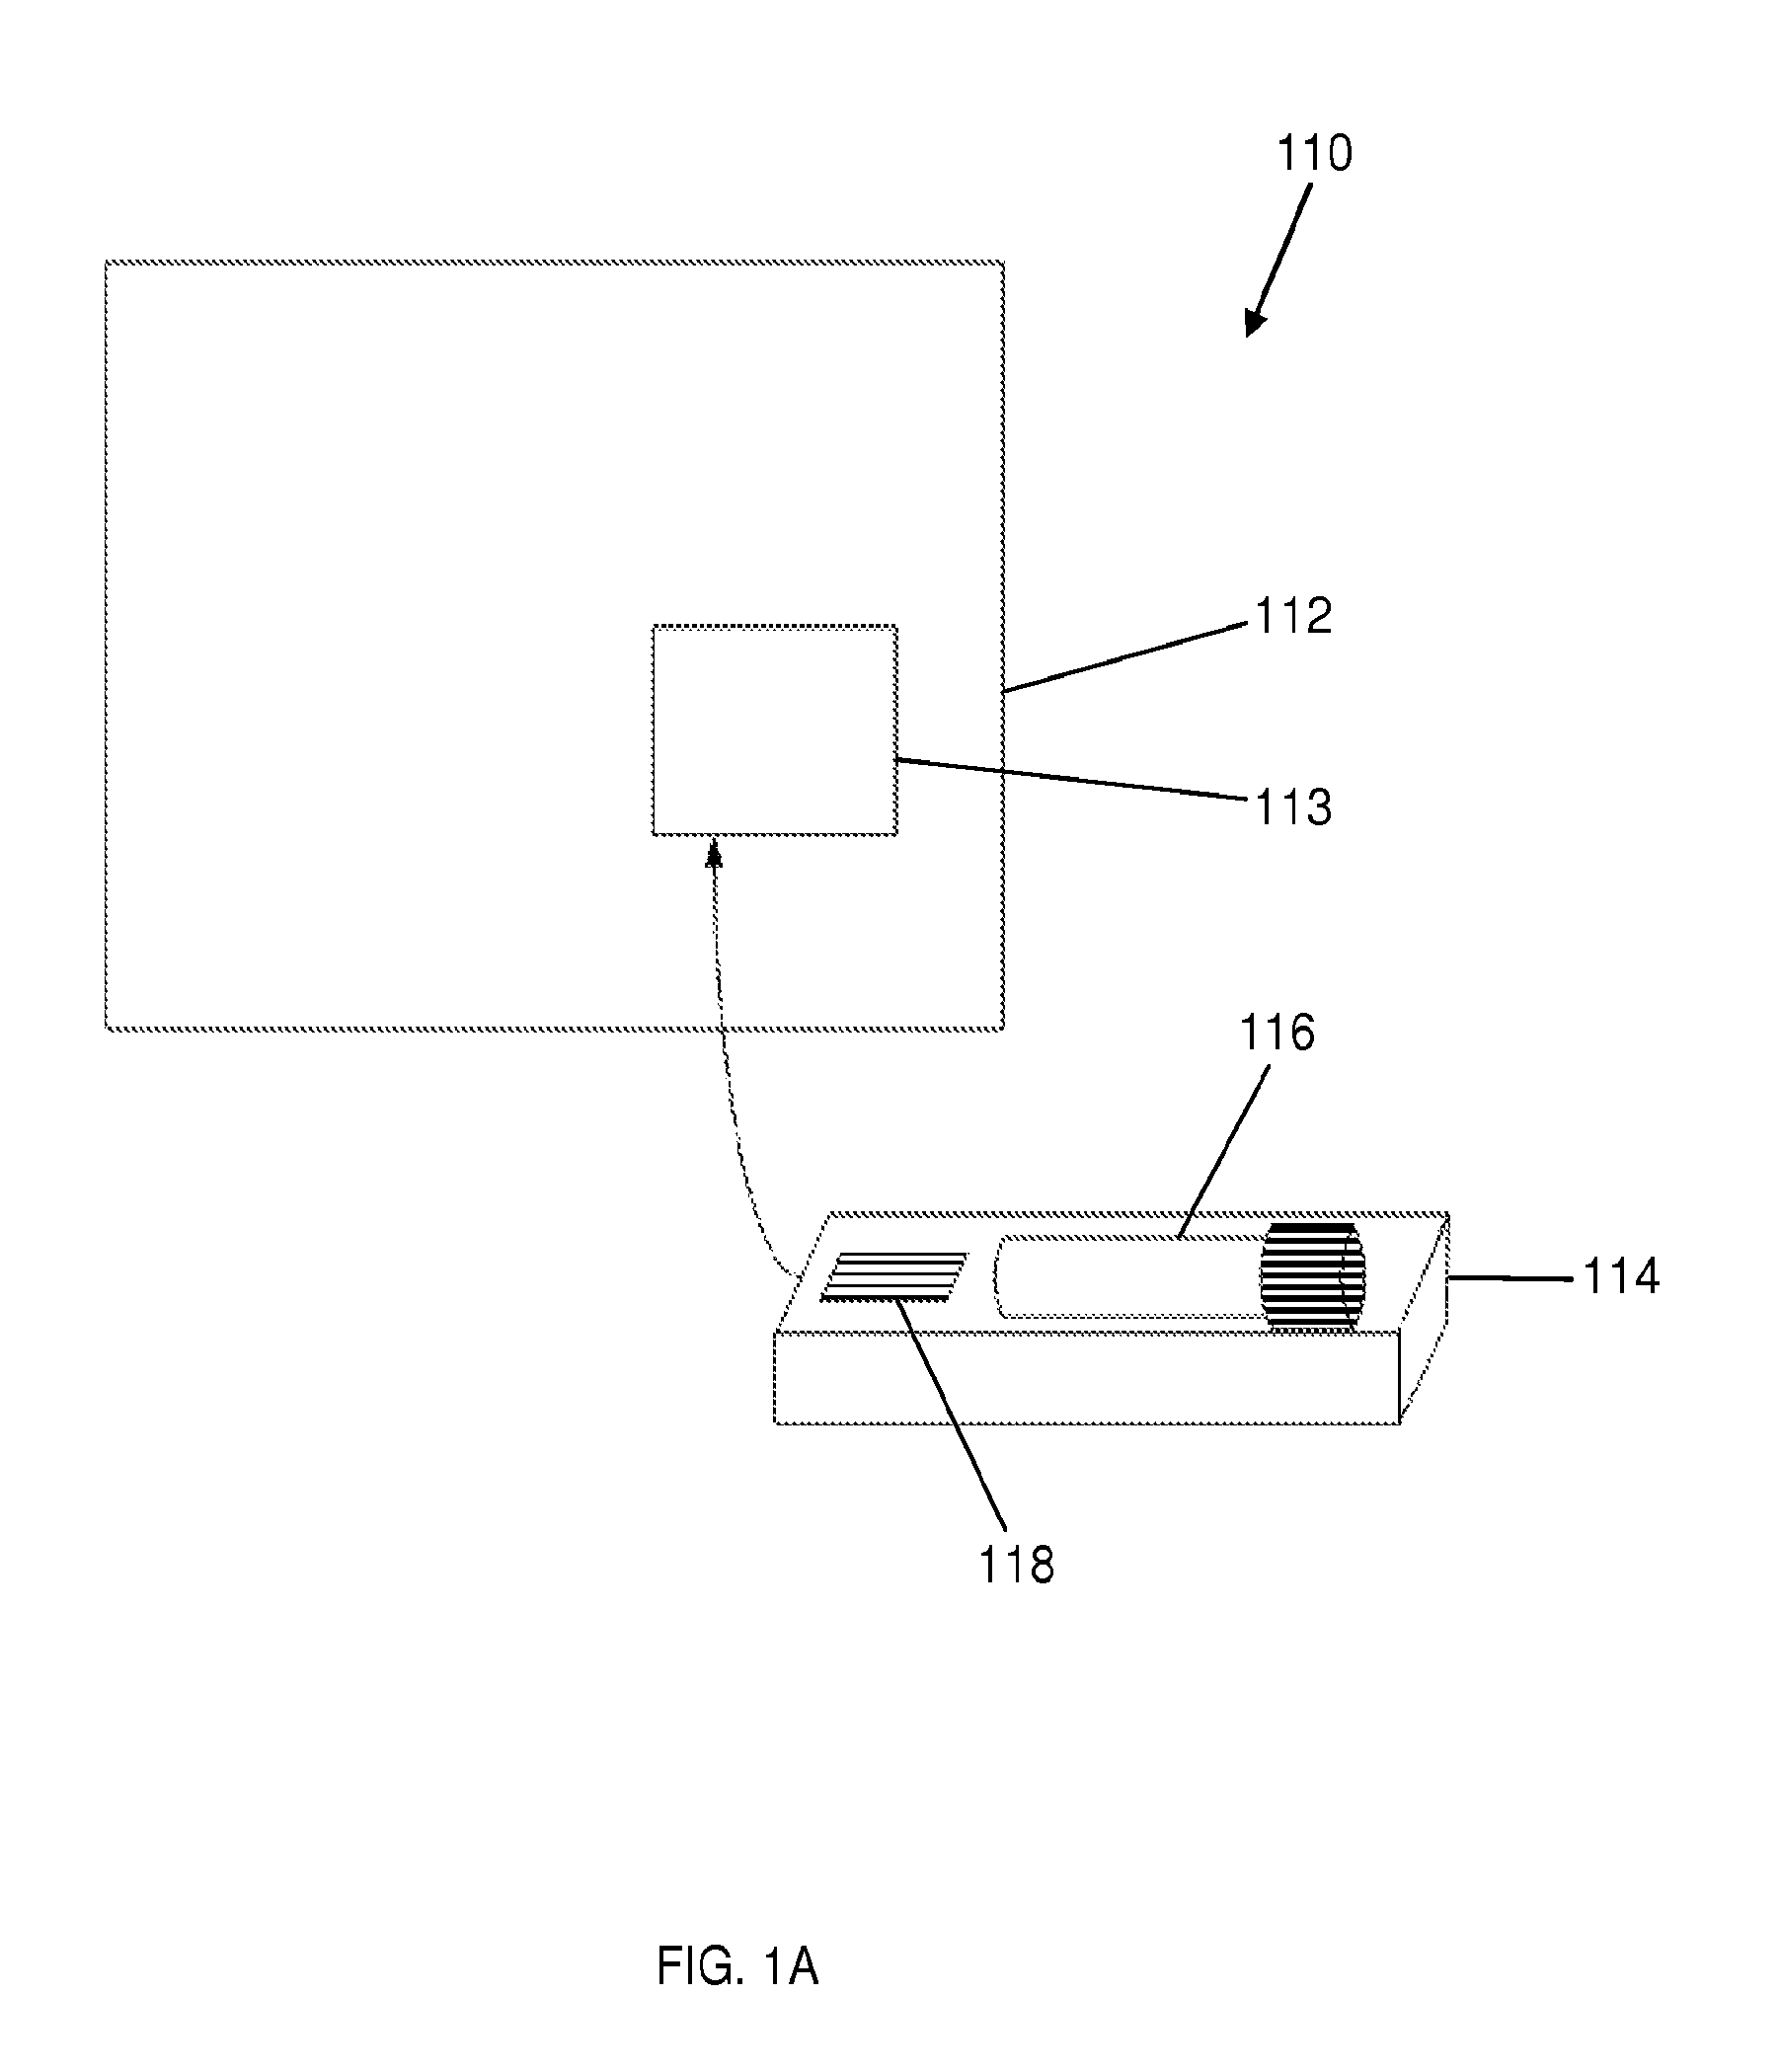 Clinical diagnostic system including instrument and cartridge